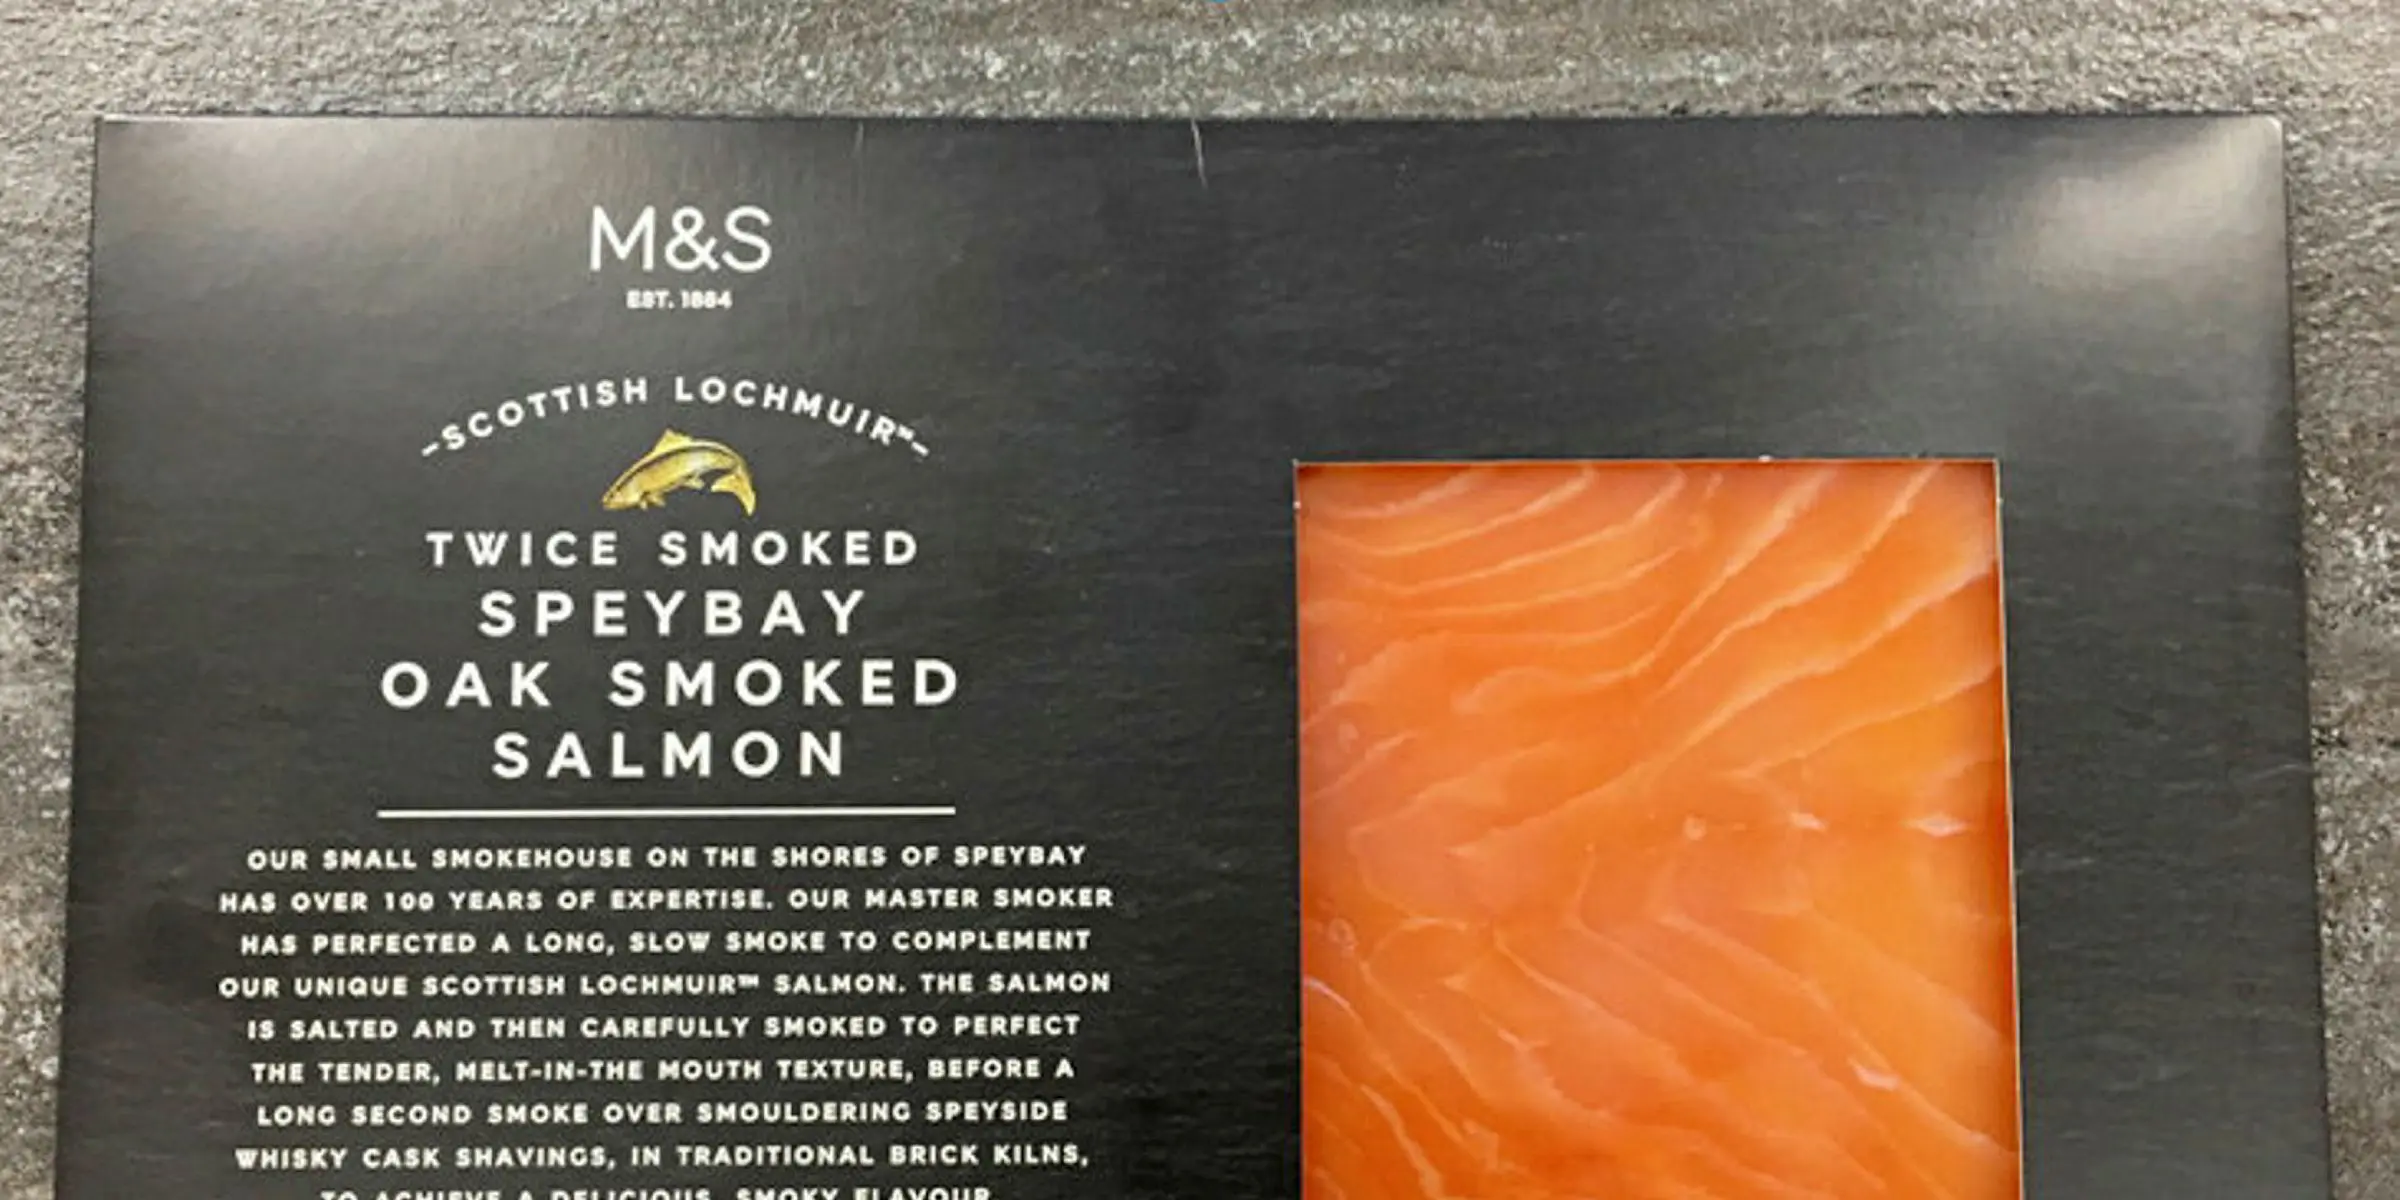 marks and spencer smoked salmon - How can you tell if smoked salmon is good quality